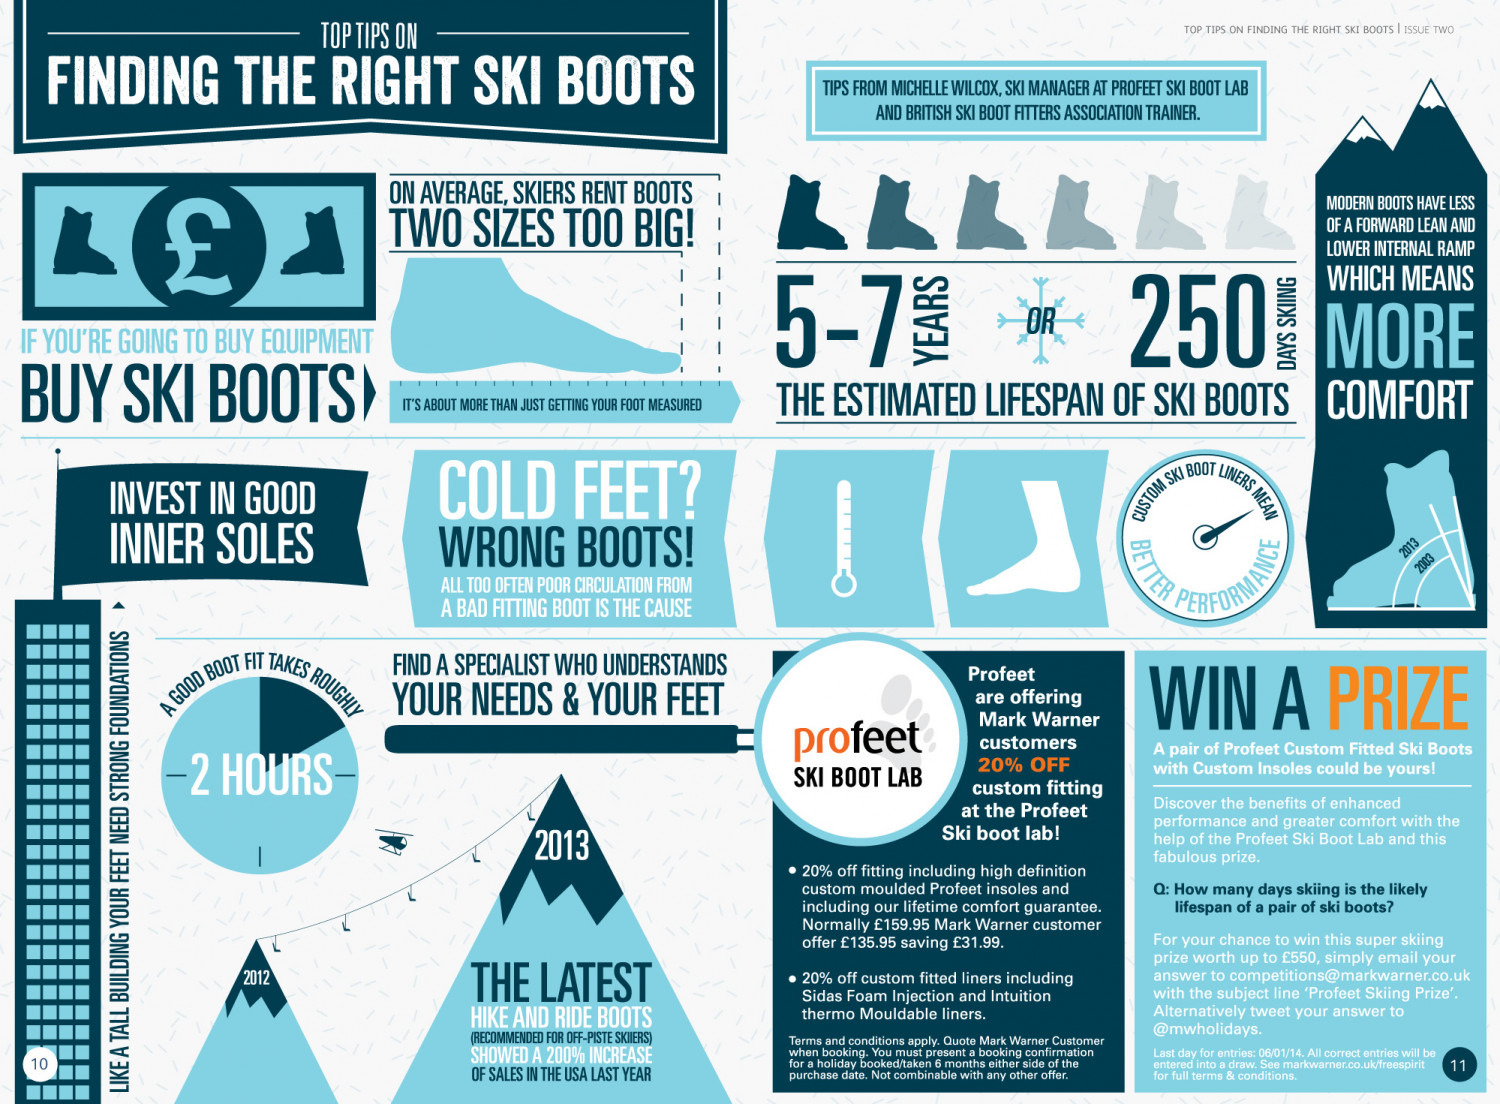 How To Find The Right Ski Boots Infographic